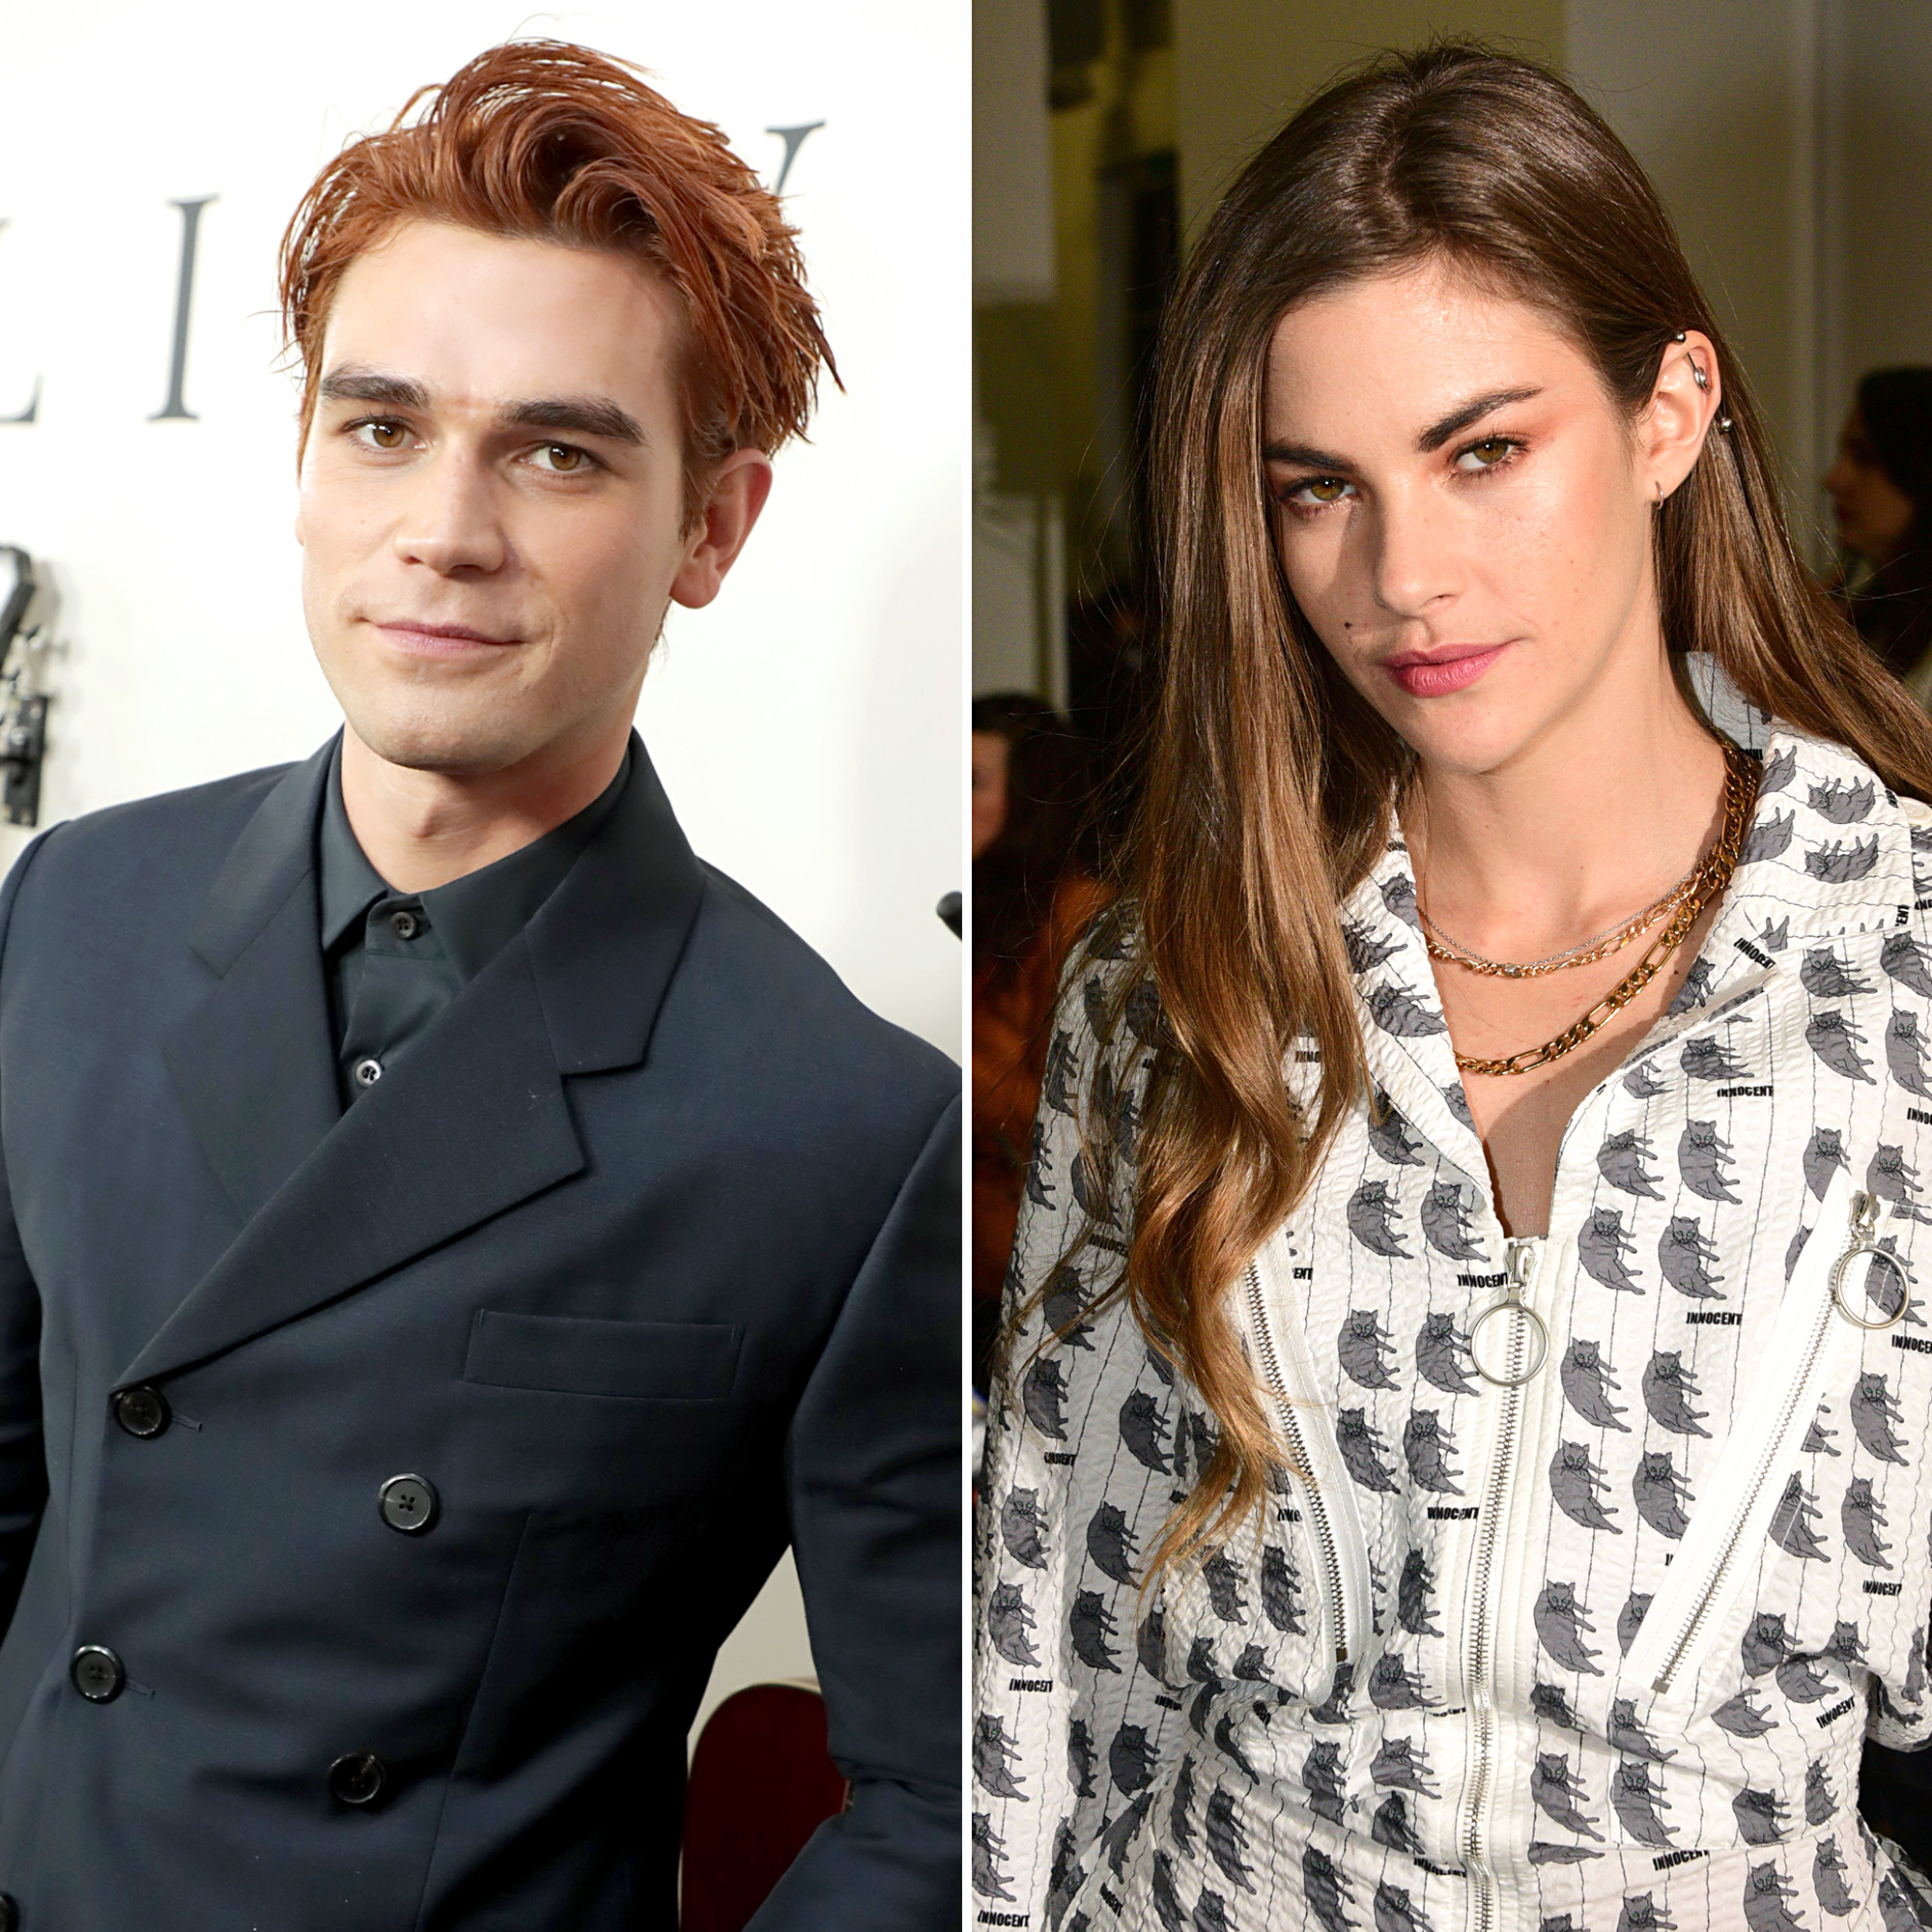 Nudist Magazine Pages - KJ Apa Takes Nude Photos of Clara Berry, She Declares Love for Him